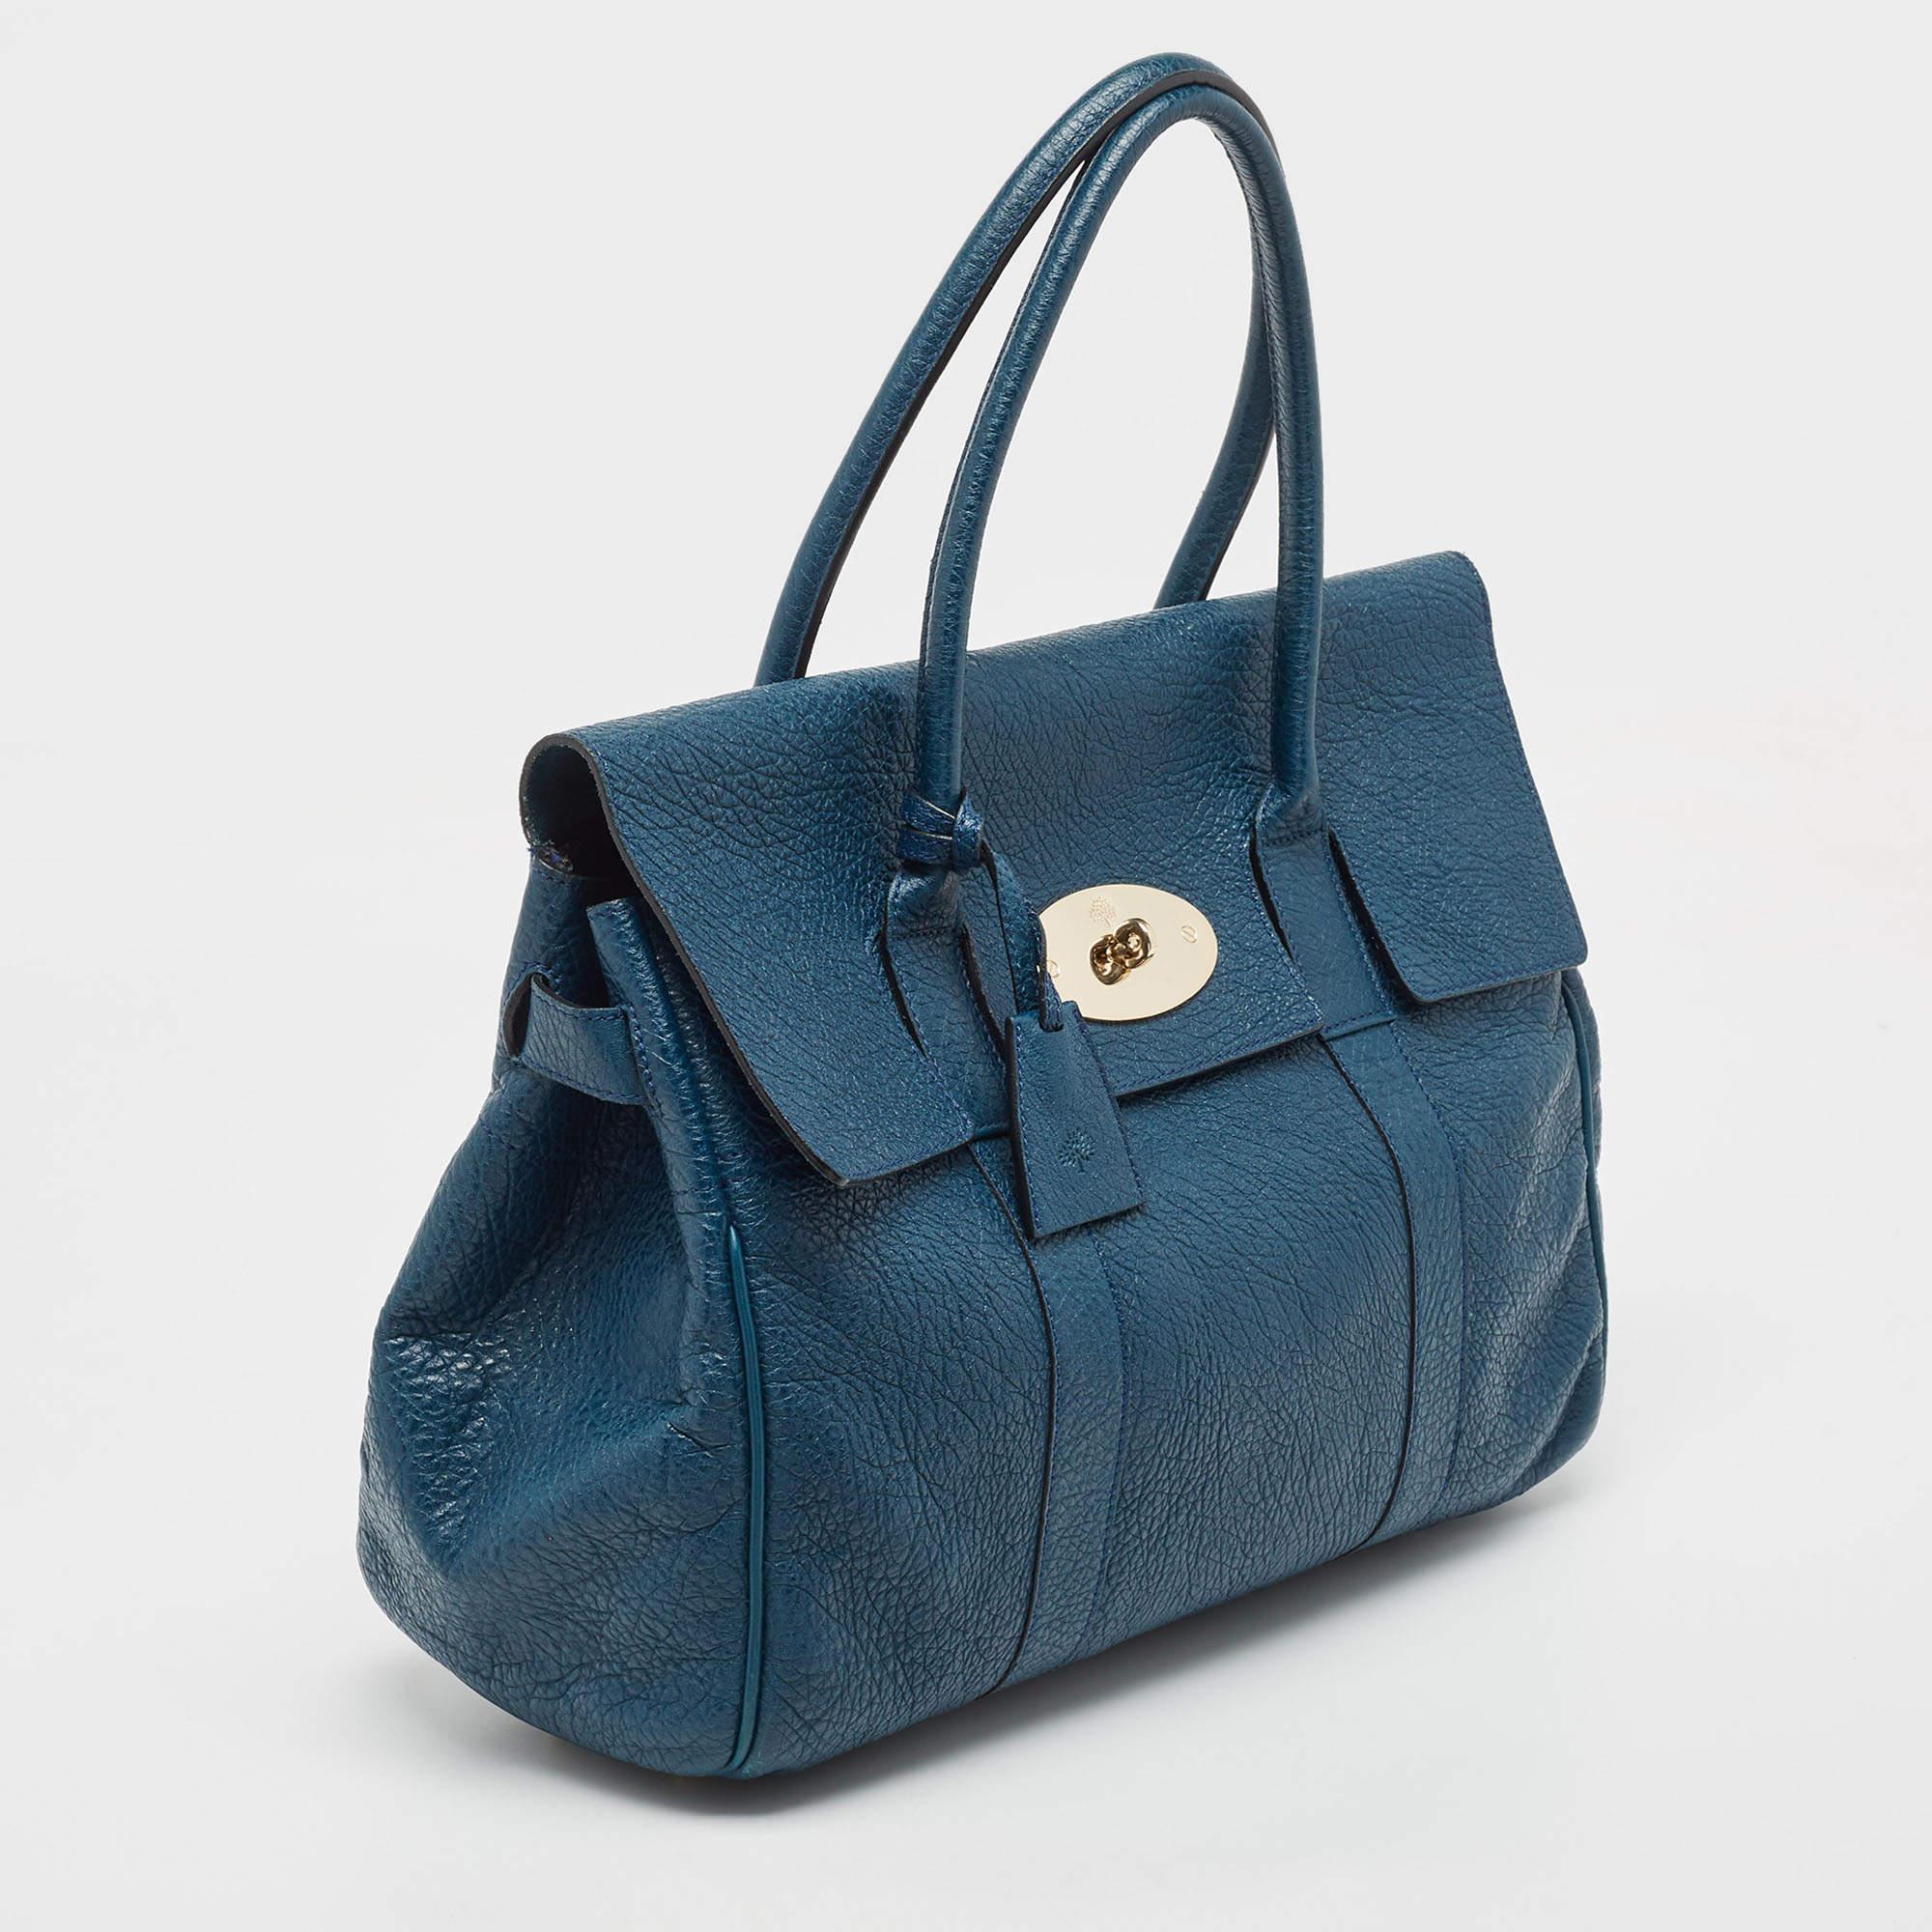 Women's Mulberry Teal Blue Leather Bayswater Satchel For Sale